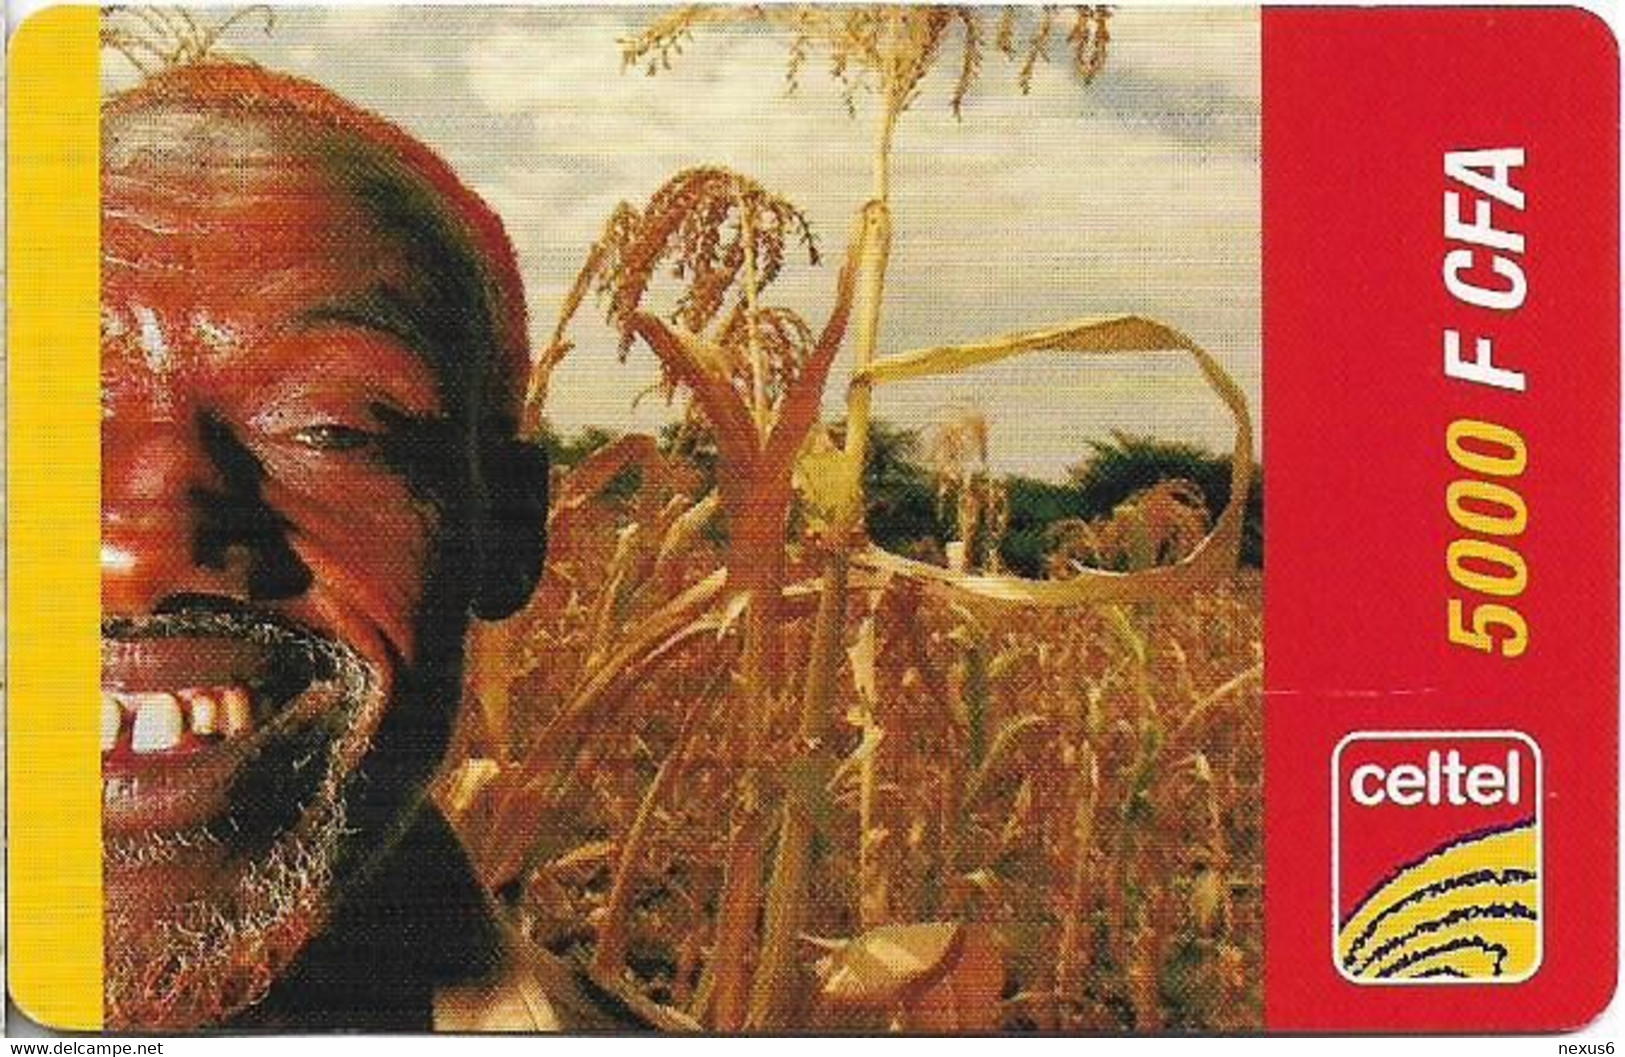 Chad - Celtel - Old Man In A Plantation - Exp.31.12.2006, GSM Refill 5.000FCFA, Used - Chad